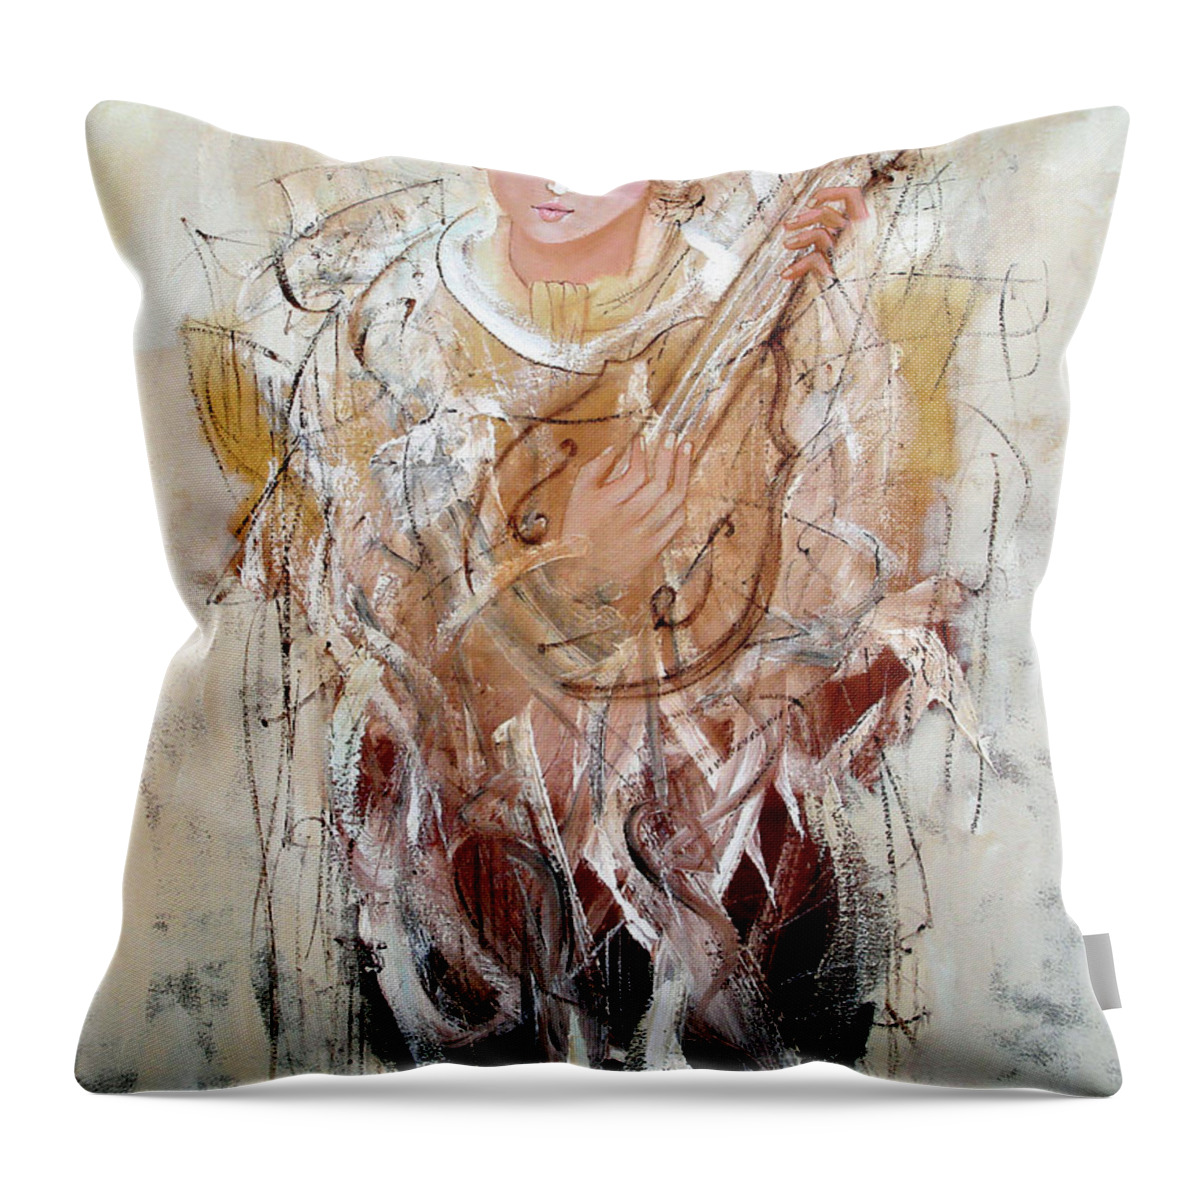 Figurative Throw Pillow featuring the painting Song of Joy by Jim Stallings